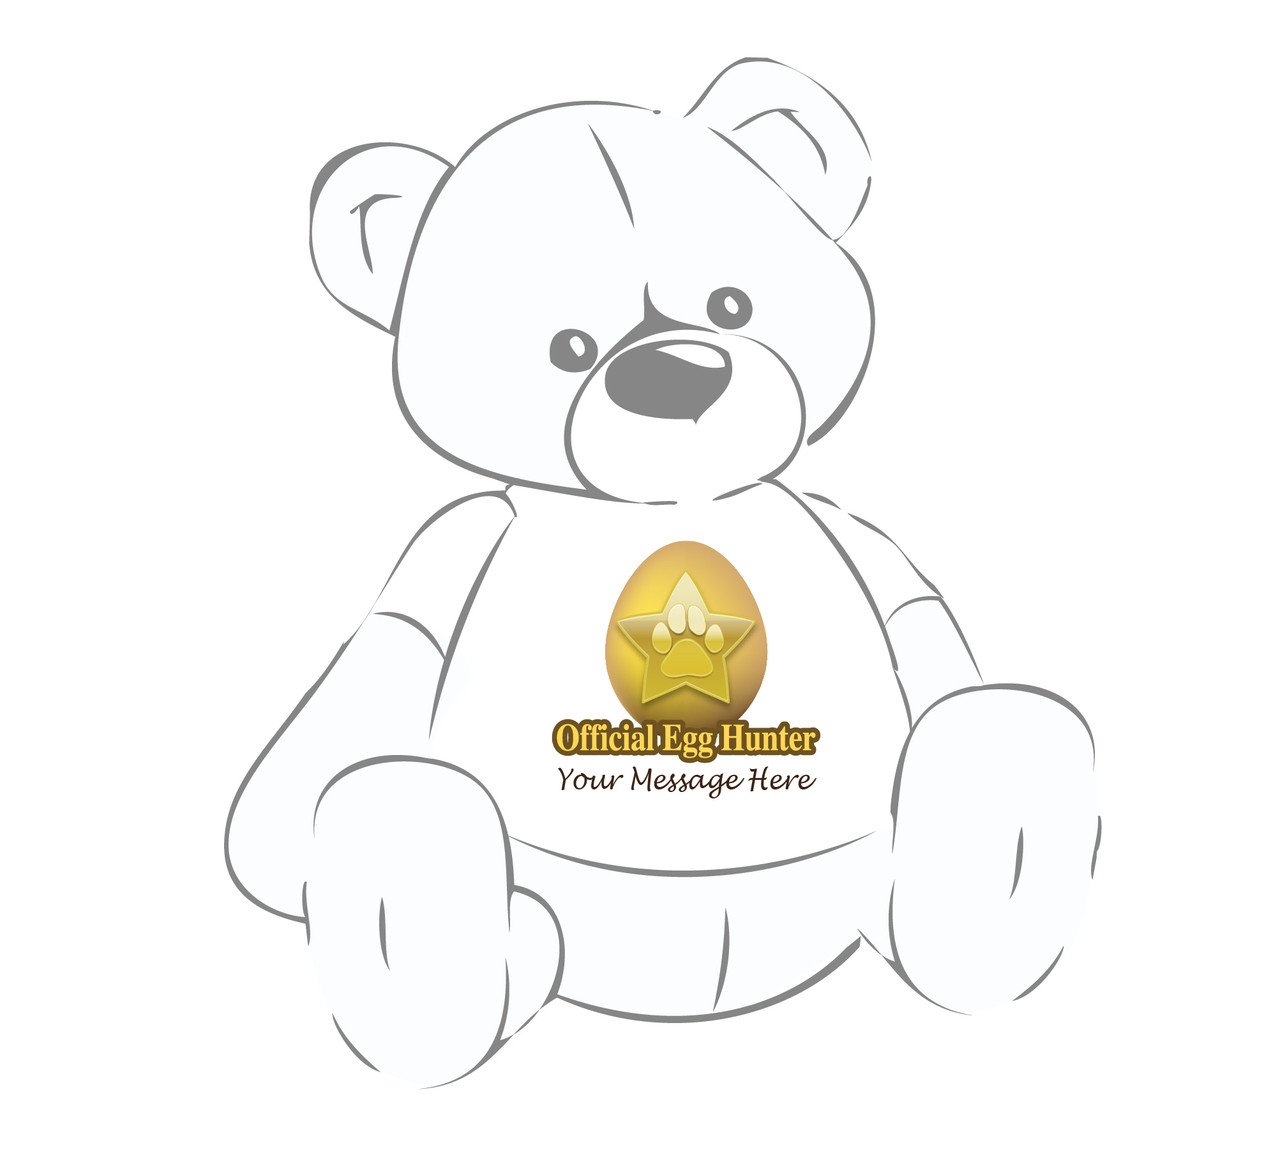 Personalized “Official Egg Hunter” Giant Teddy bear shirt for Easter